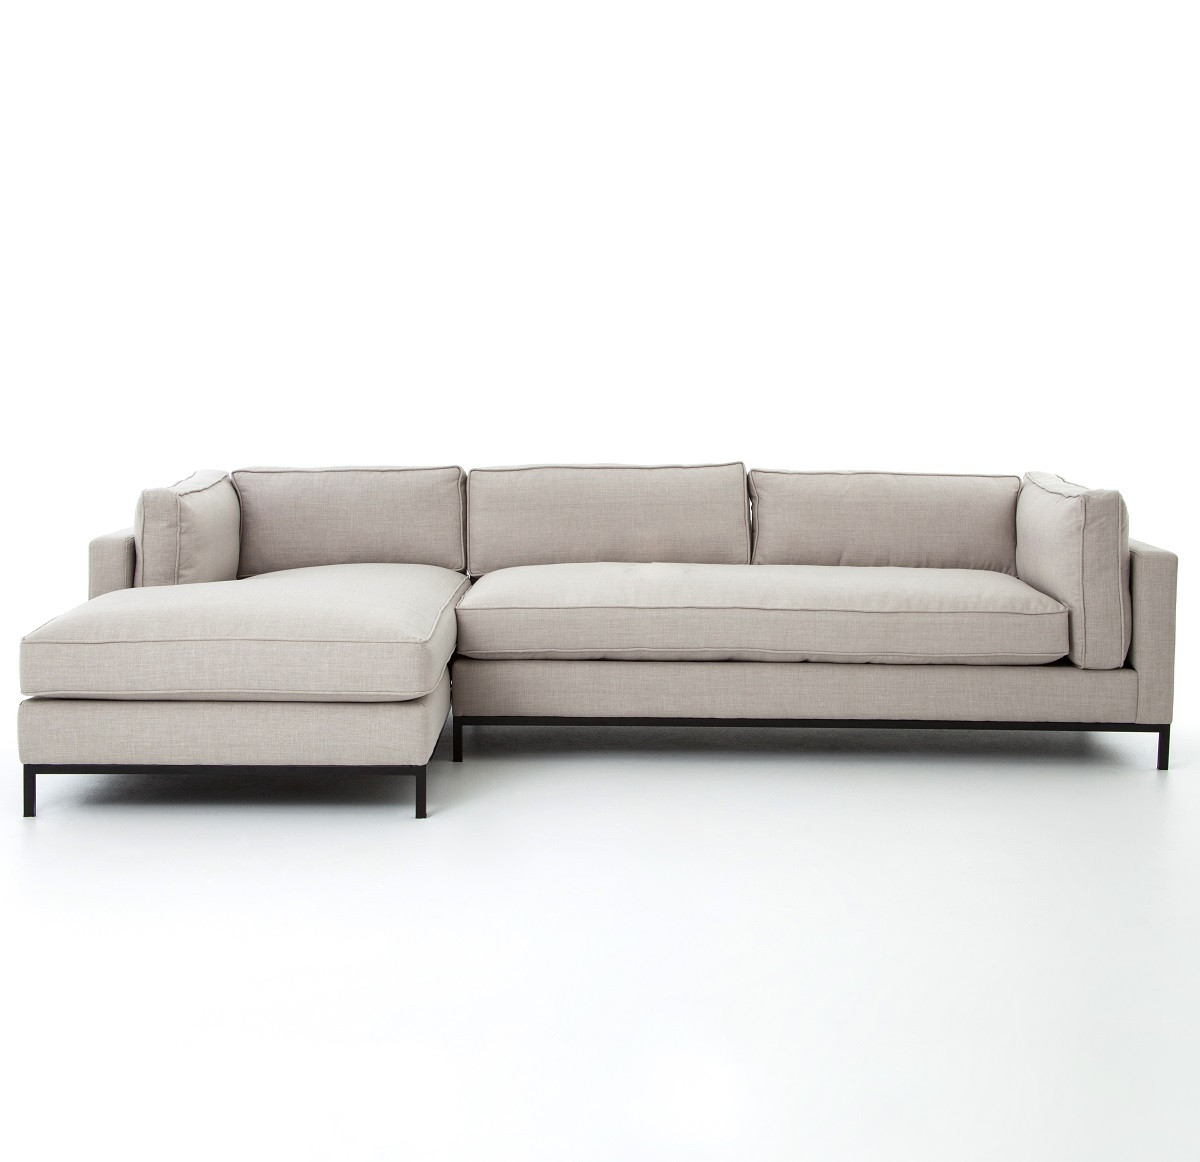 Atelier Grammercy 2 Pc Sectional Left Arm Chaise1  73362.1427754358.1280.1280 ?c=2